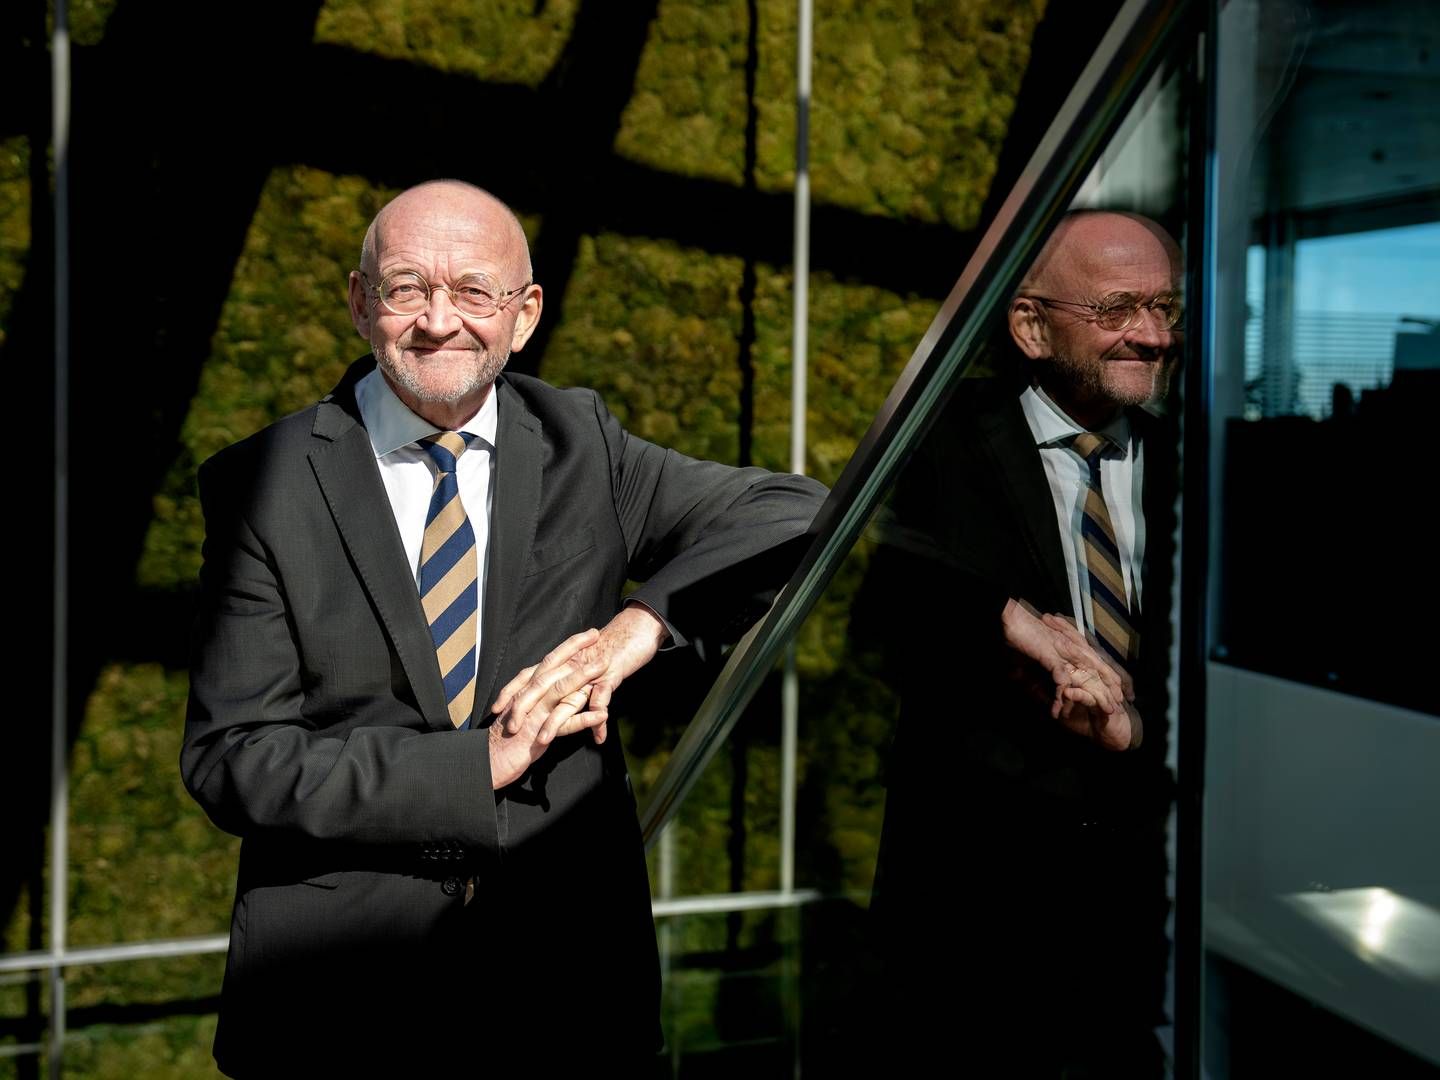 Torben Möger Pedersen negotiated an exit package many years ago, which now means that he is taking DKK 29m (EUR 3.88m) with him as he leaves Danish pension fund PensionsDanmark. | Foto: Stine Bidstrup